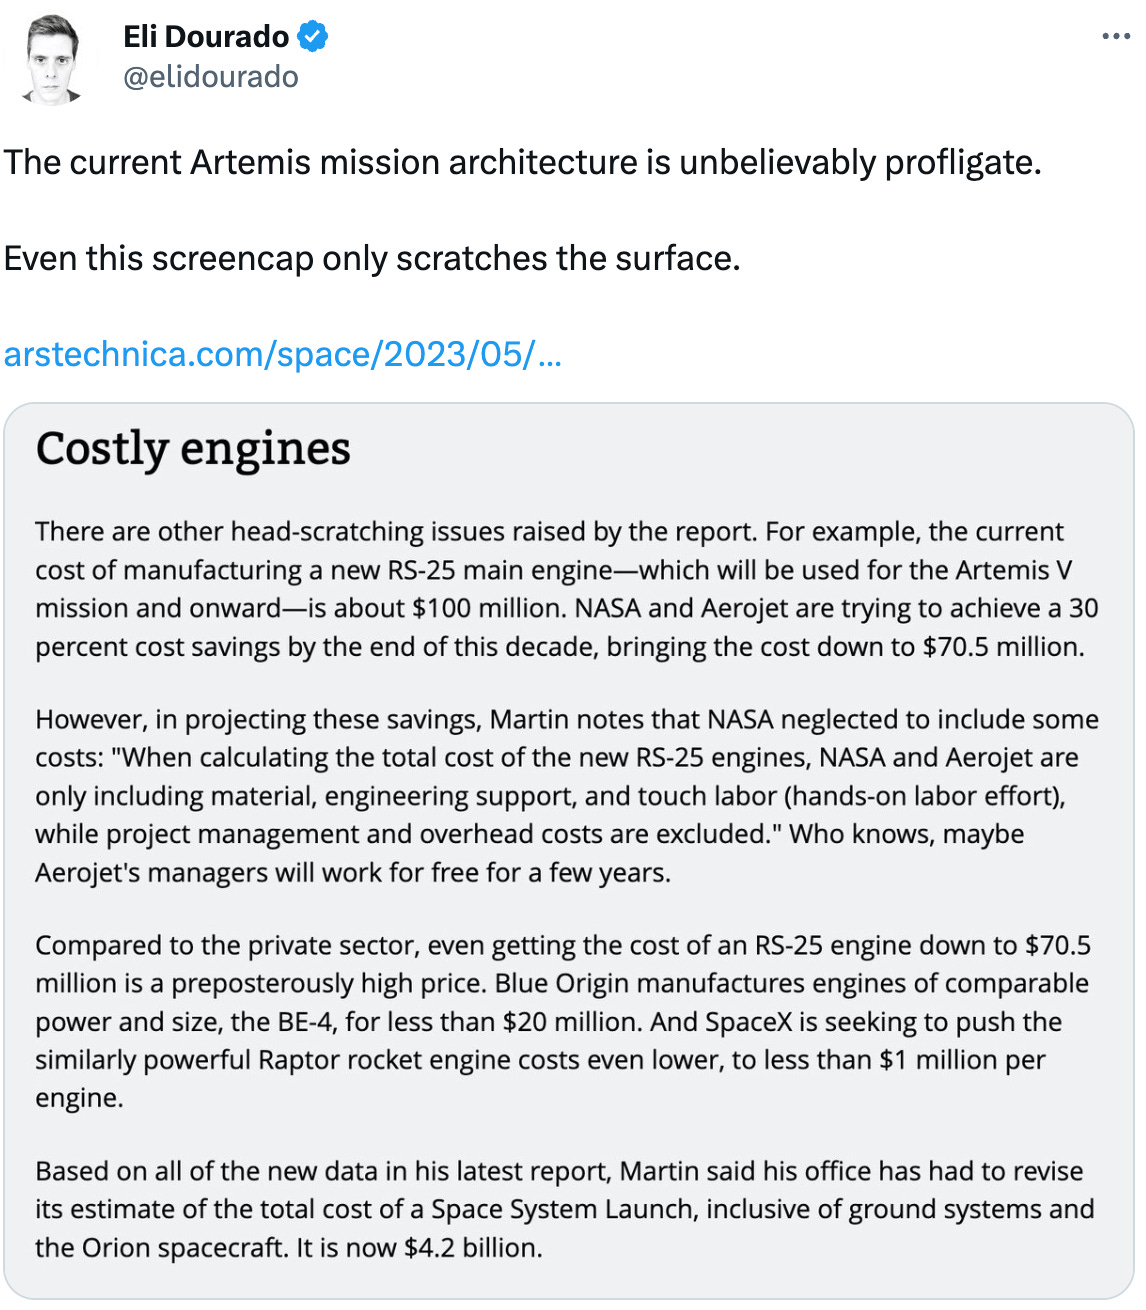  See new Tweets Conversation Eli Dourado @elidourado The current Artemis mission architecture is unbelievably profligate.  Even this screencap only scratches the surface.  https://arstechnica.com/space/2023/05/a-new-report-finds-nasa-has-spent-an-obscene-amount-of-money-on-sls-propulsion/